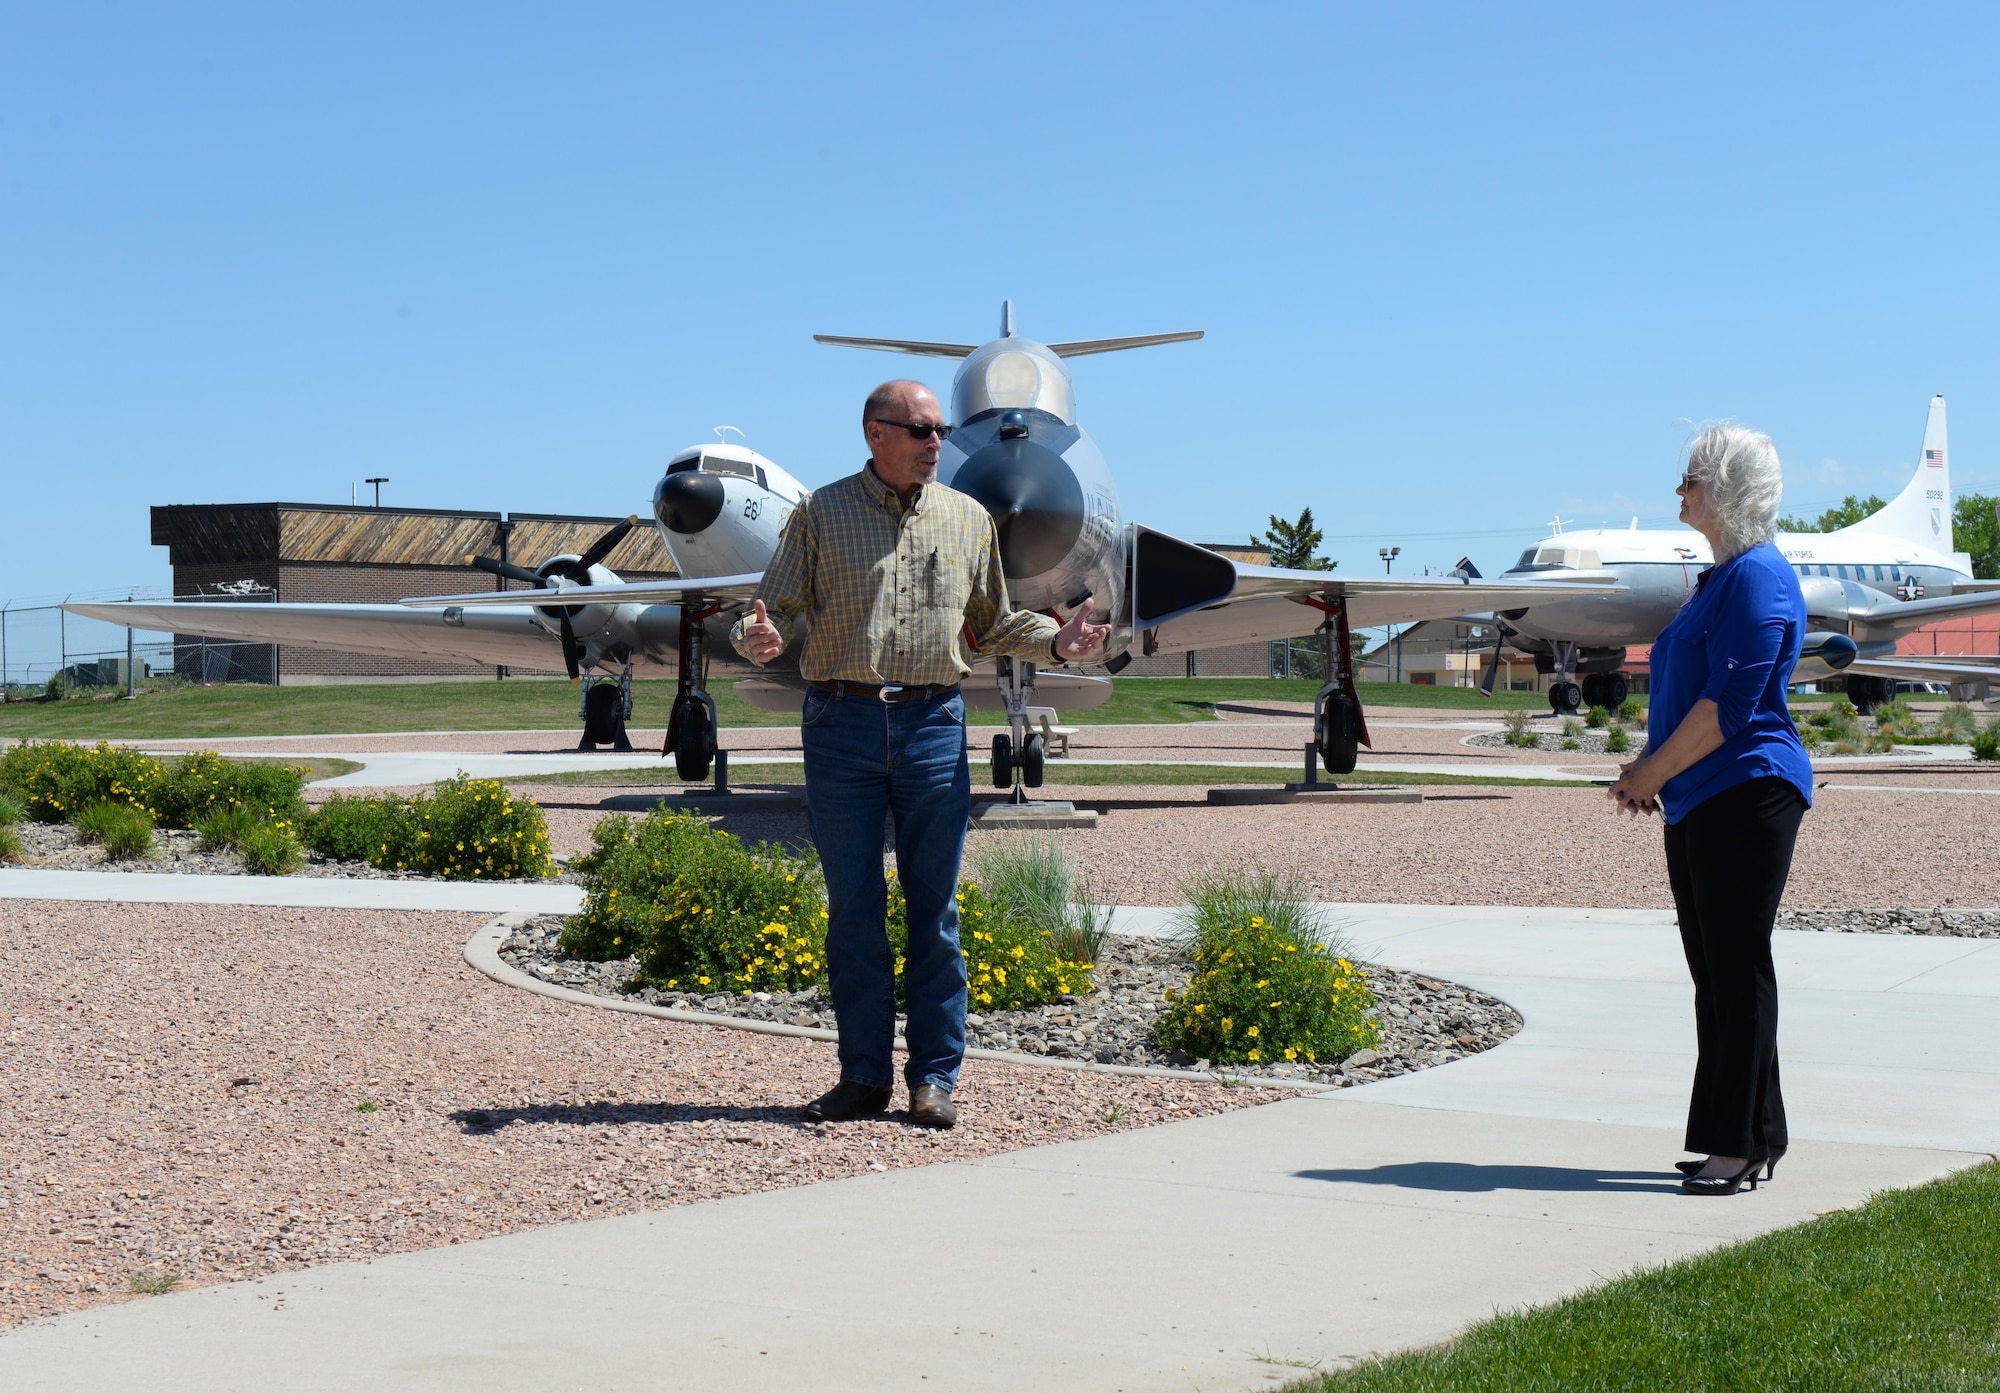 David Klein, lead architect assigned to the 28th Civil Engineer Squadron, explains the different steps taken to revitalize the South Dakota Air and Space Museum at Box Elder, S.D., May 31, 2017. The revitalization took approximately two years to complete, beginning in 2014 and ending mid-2016. (U.S. Air Force photo by Airman Nicolas Z. Erwin)